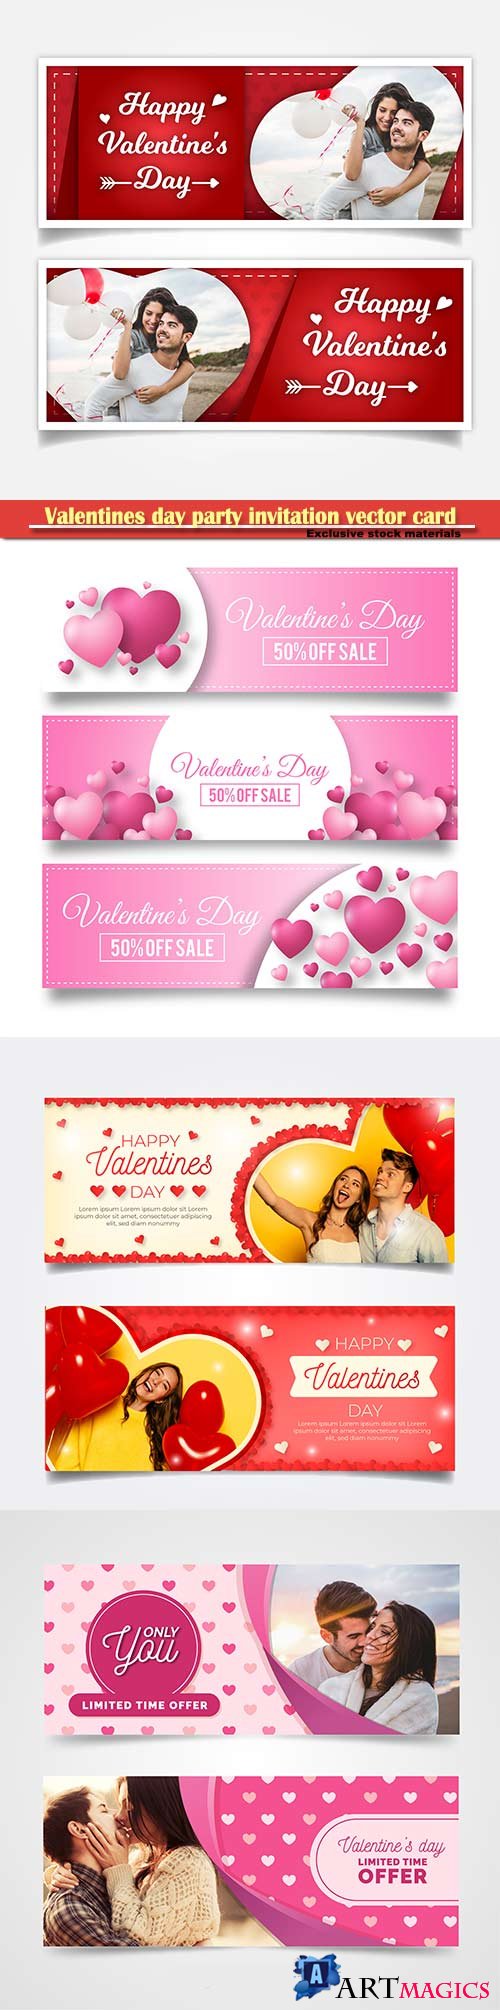 Valentines day party invitation vector card # 54